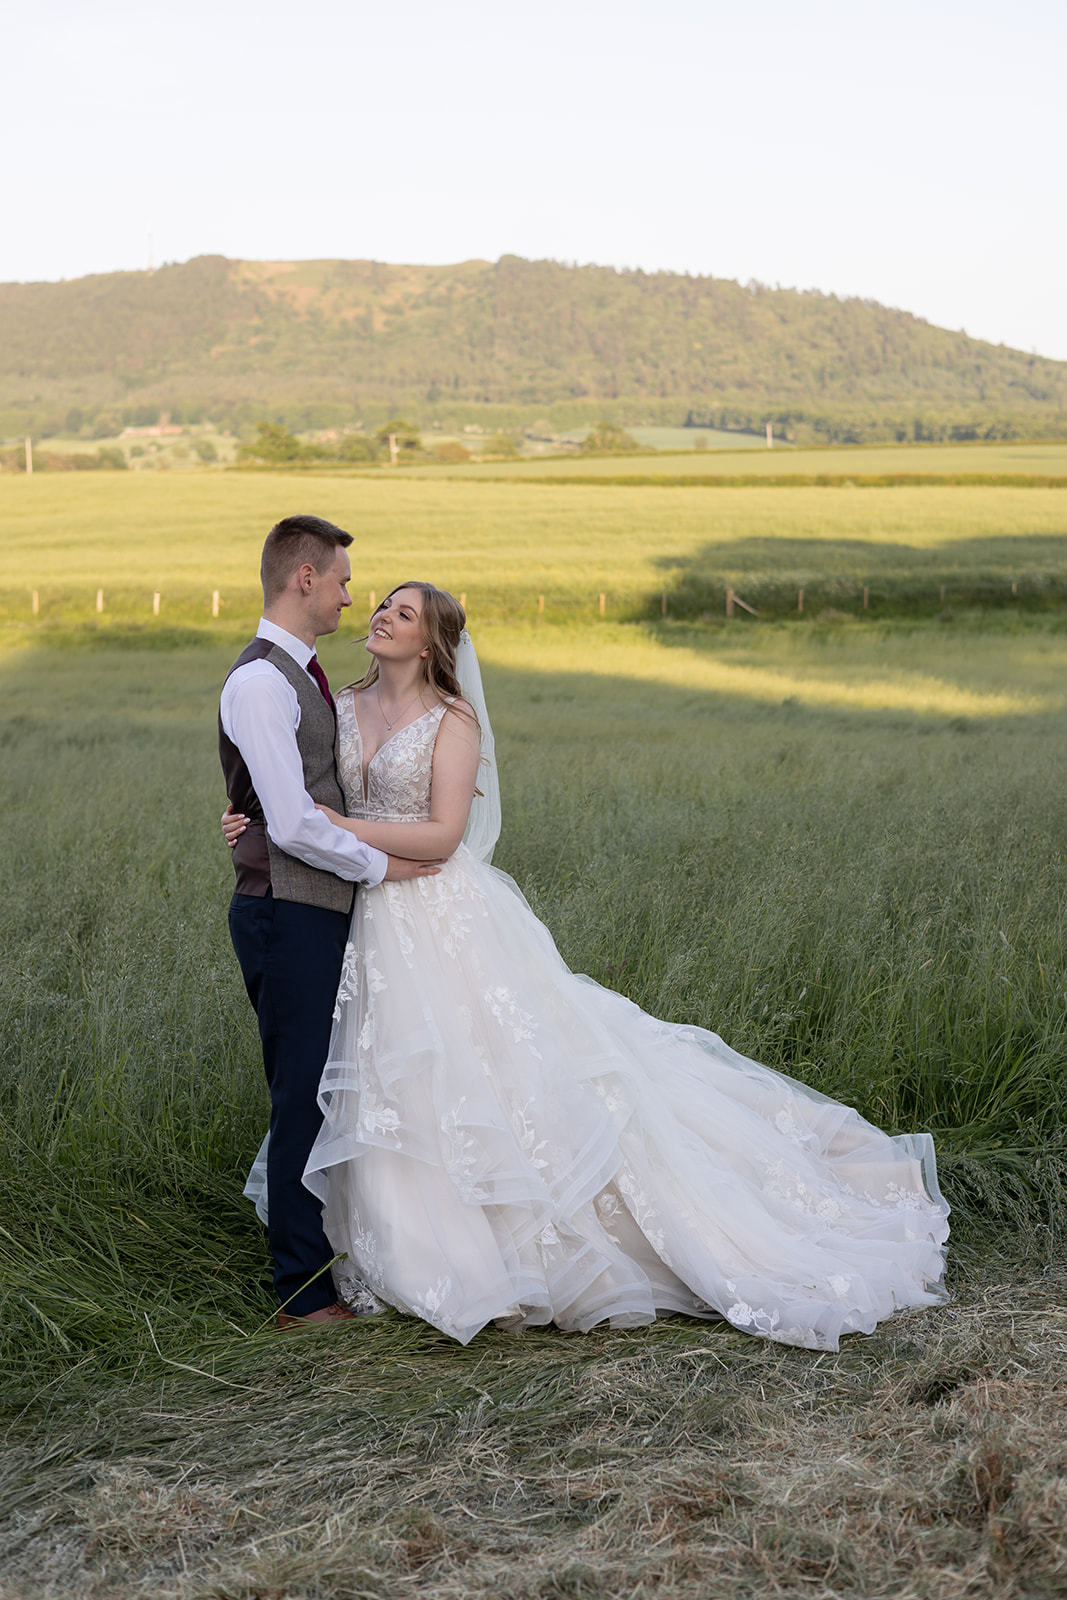 Couple on wedding day with The Wrekin hill behind them